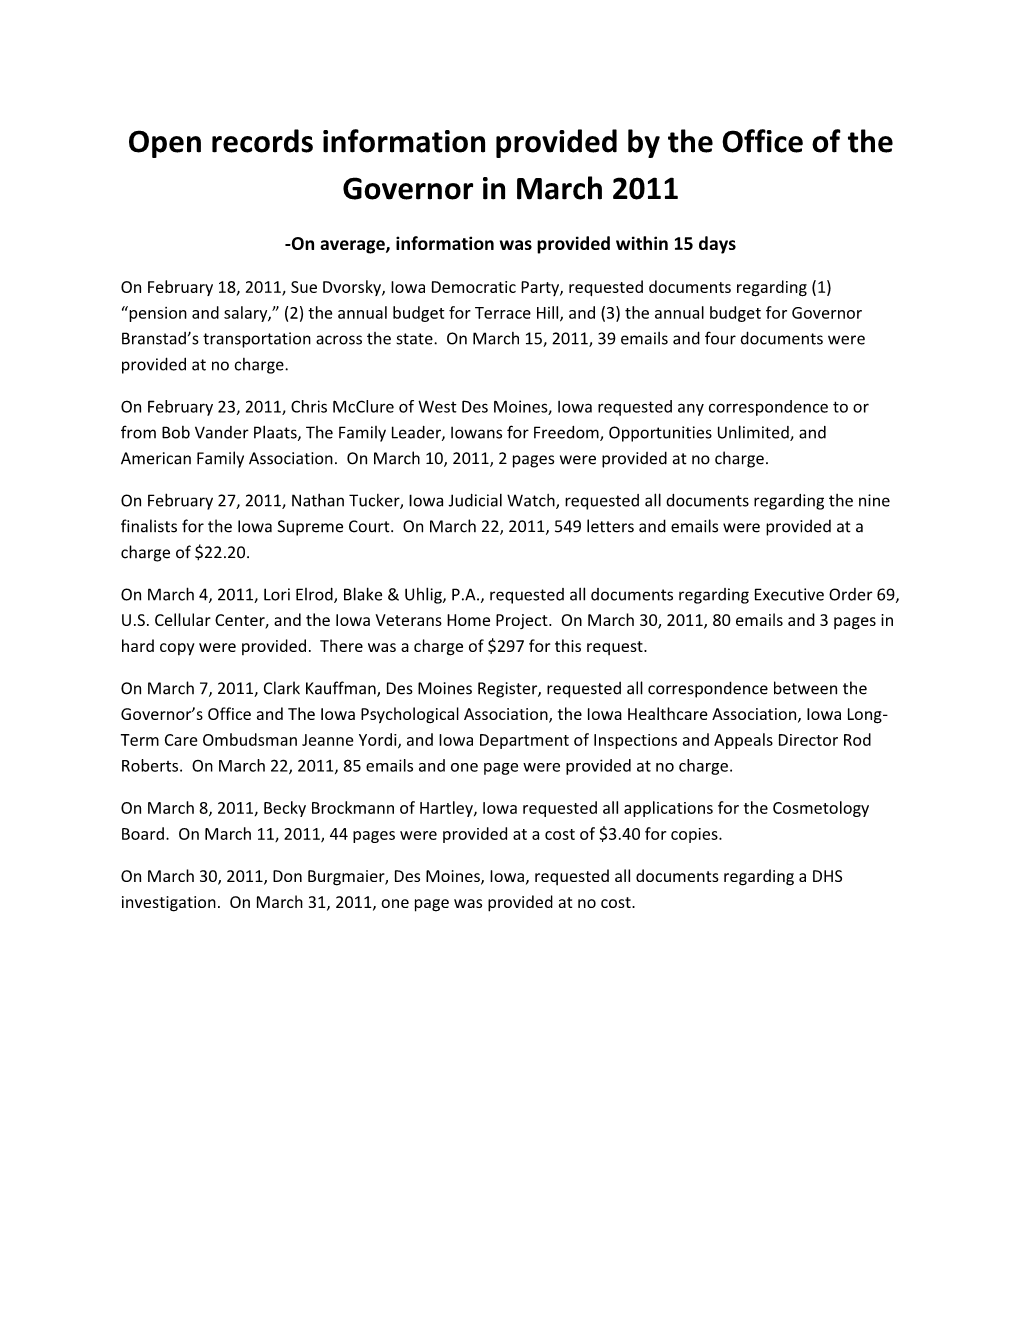 Open Records Information Provided by the Office of the Governor in March 2011